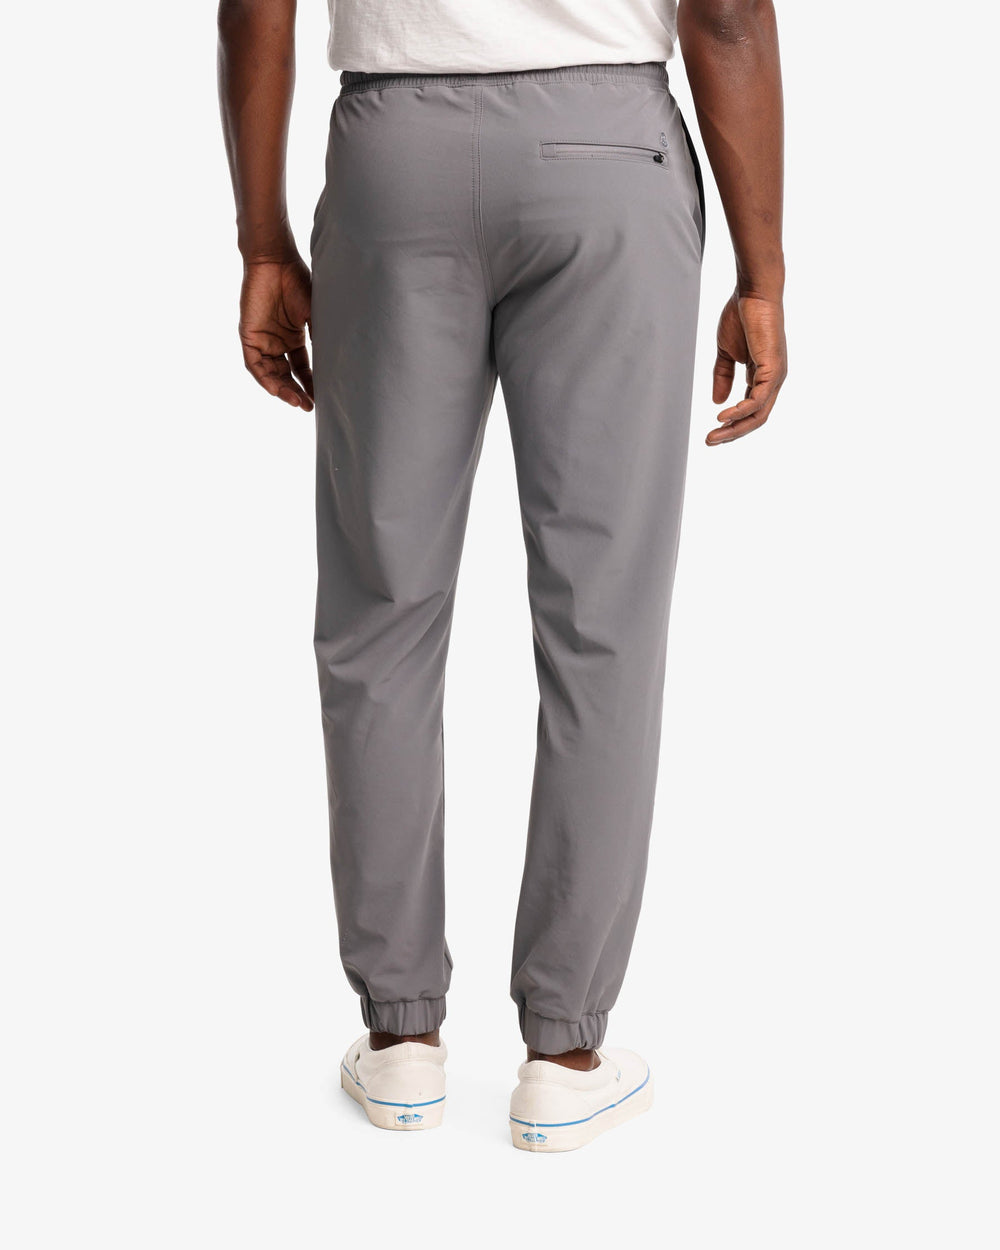 The back view of the The Excursion Performance Jogger by Southern Tide - Smoked Pearl